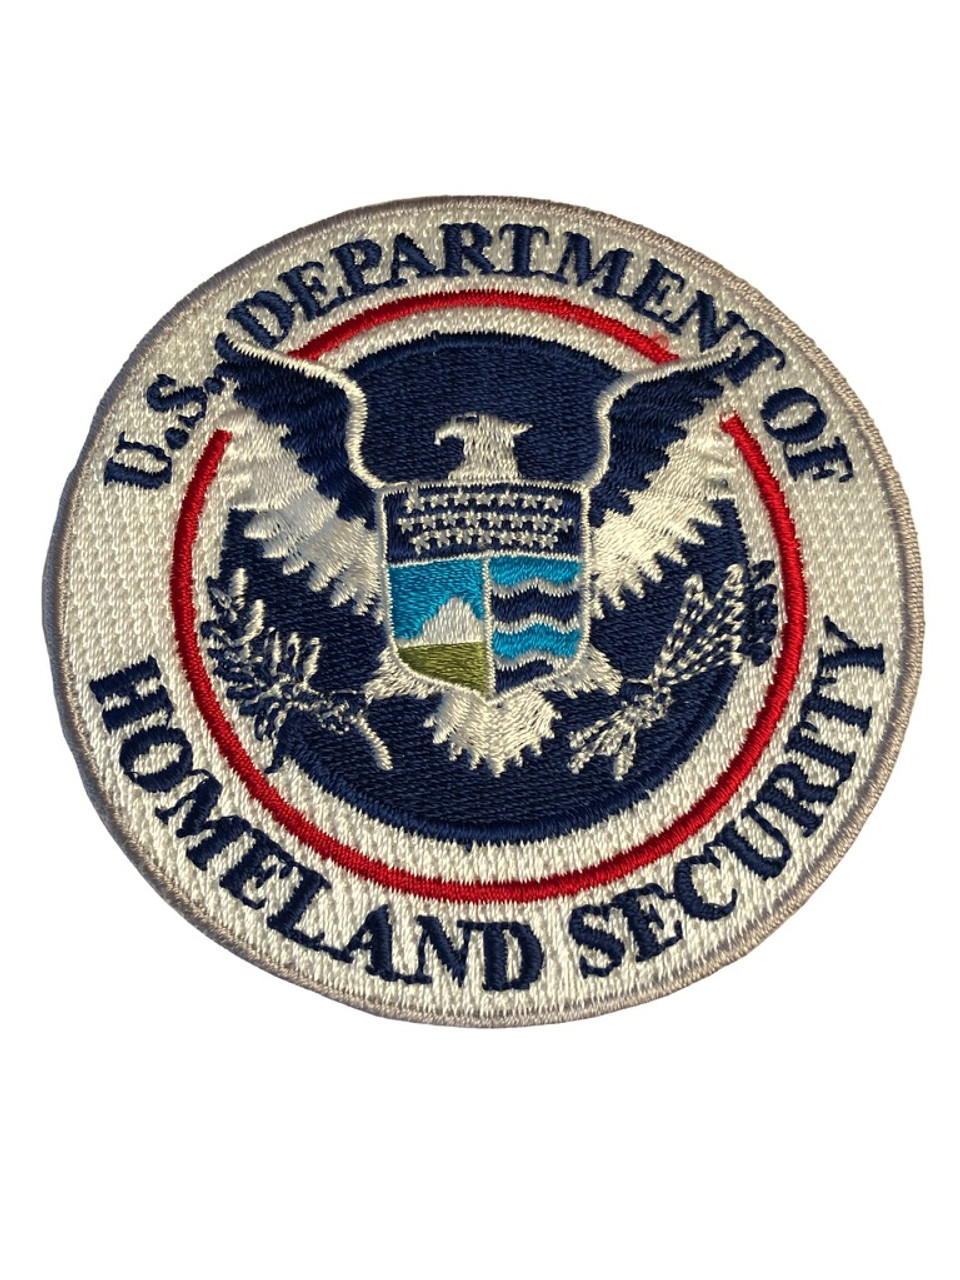 HOMELAND SECURITY PATCH